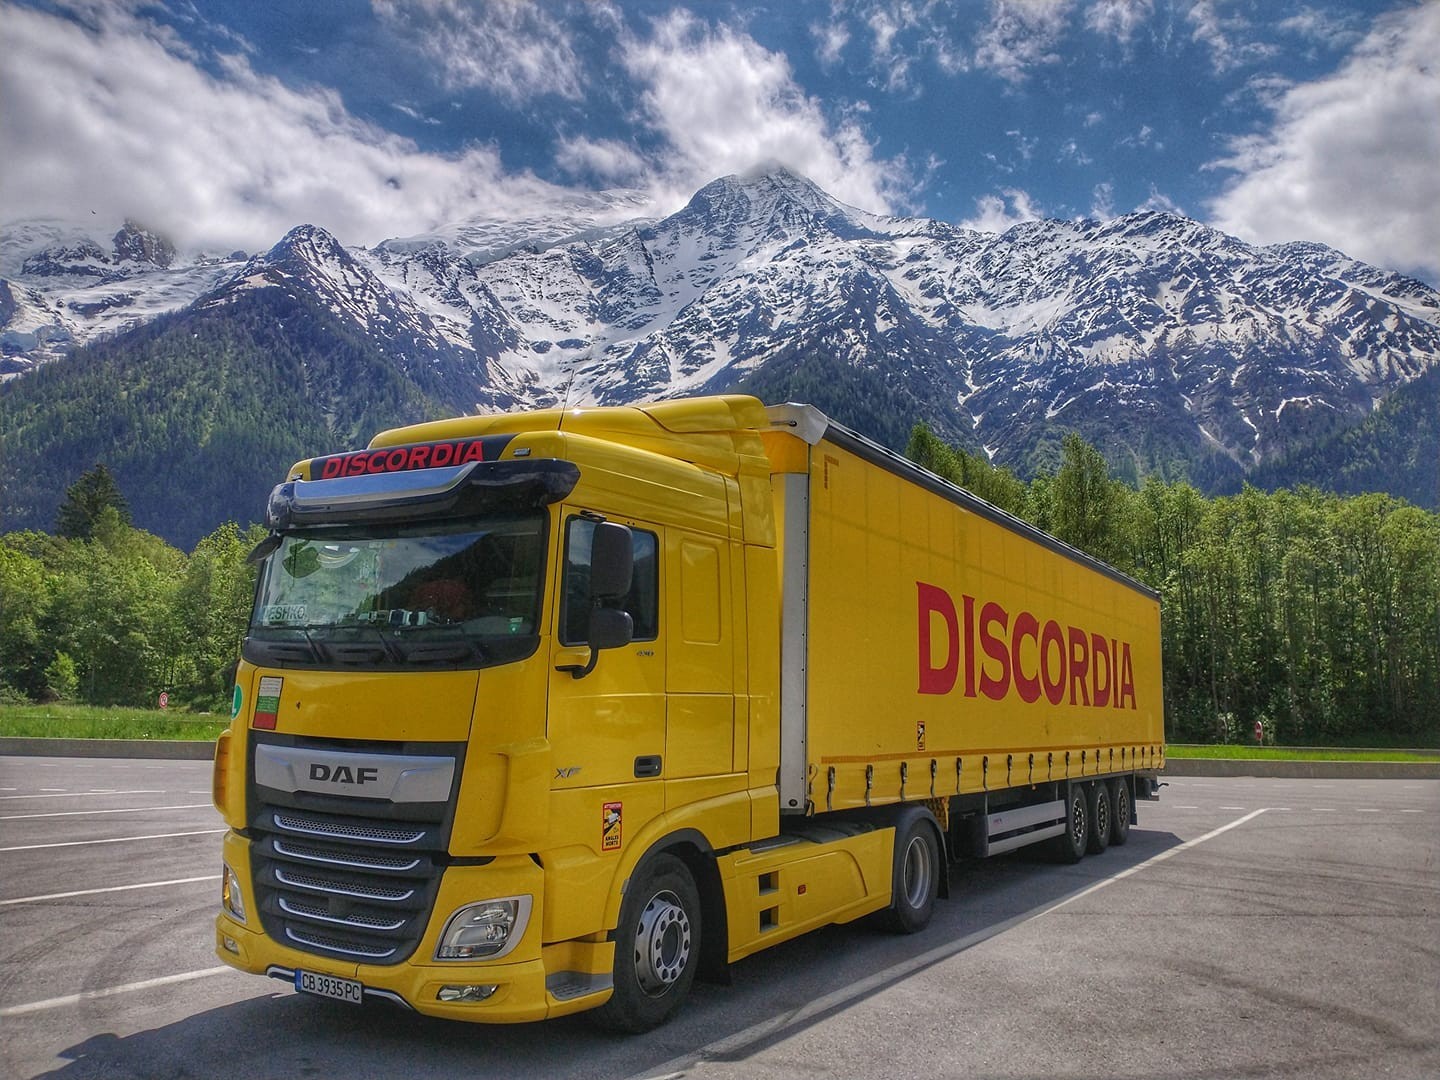 Bulgarian Company Discordia Buys 280 New Trucks By The End Of The Year